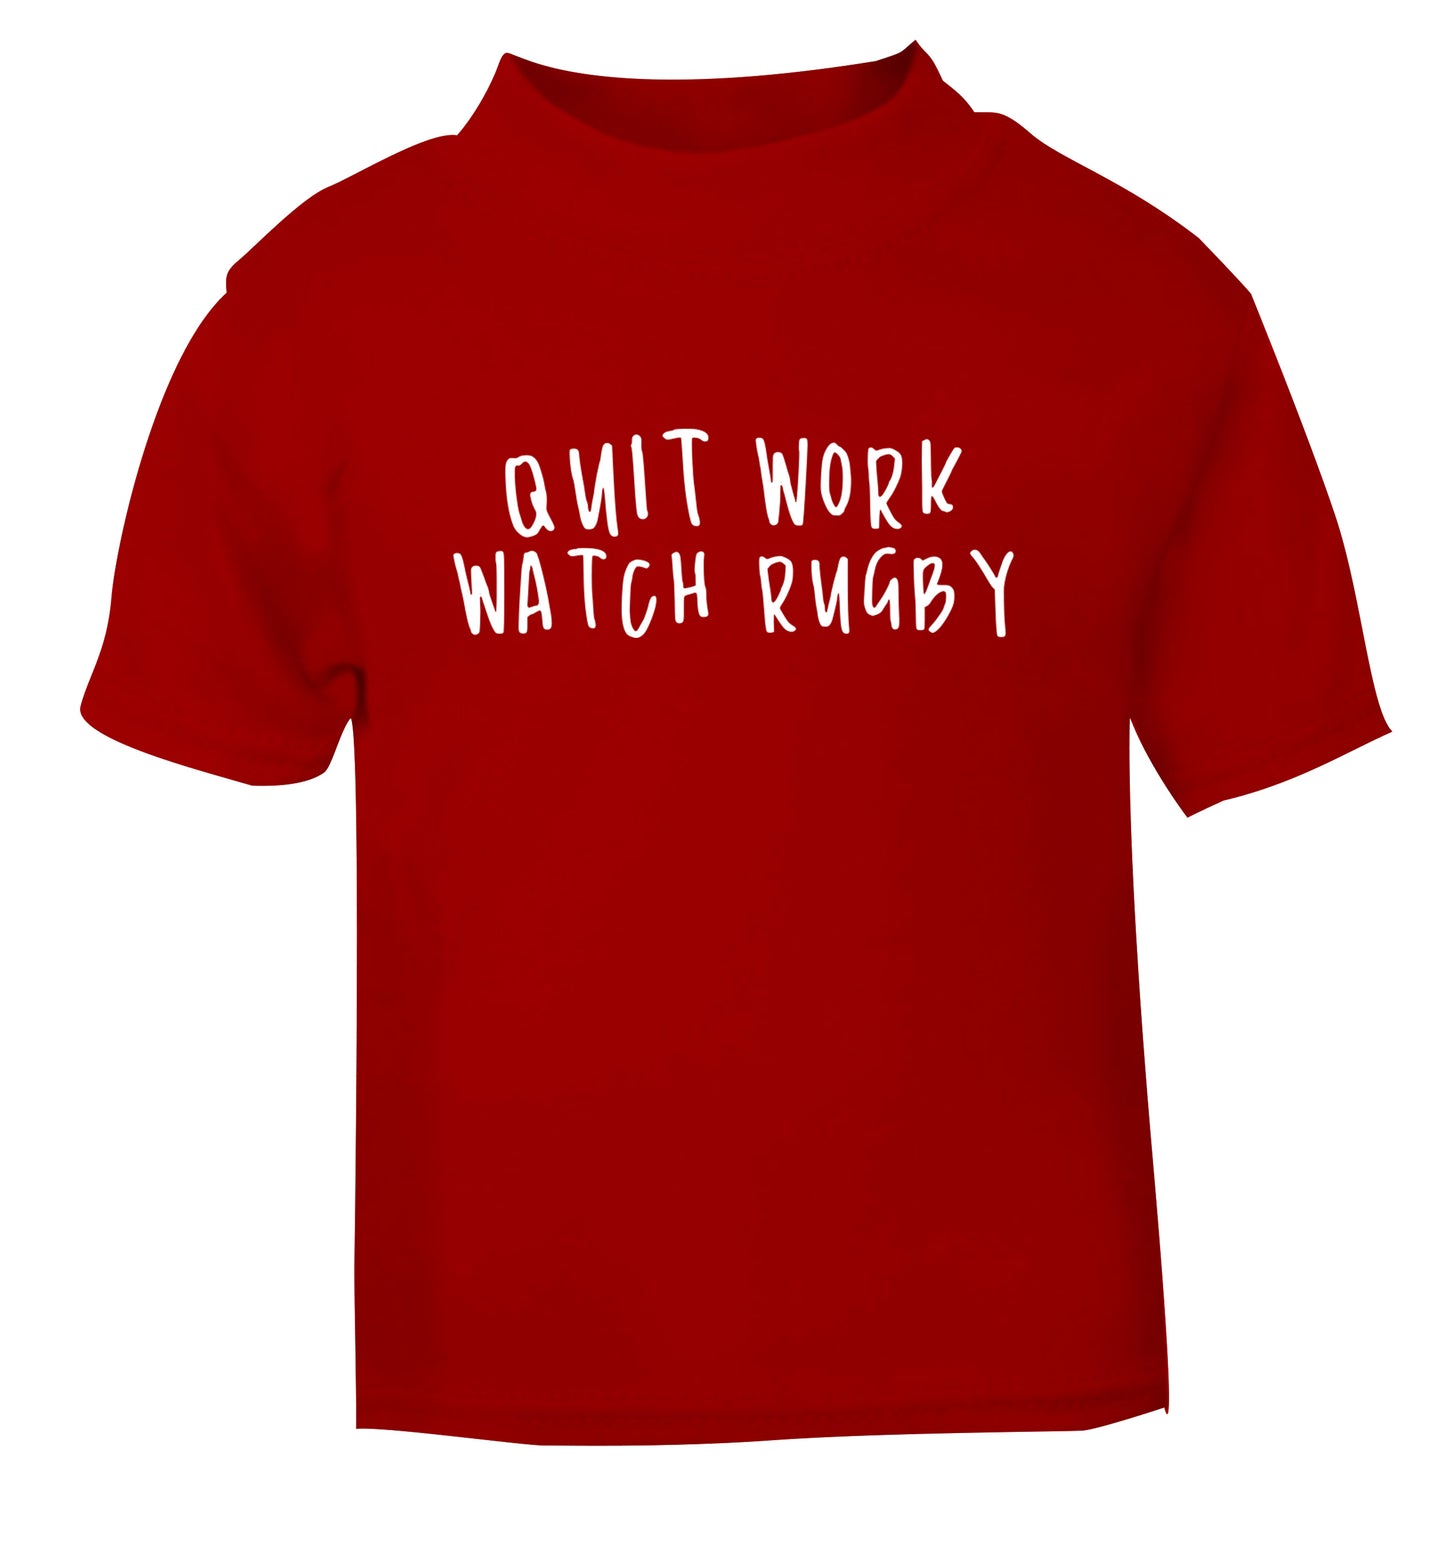 Quit work watch rugby red Baby Toddler Tshirt 2 Years